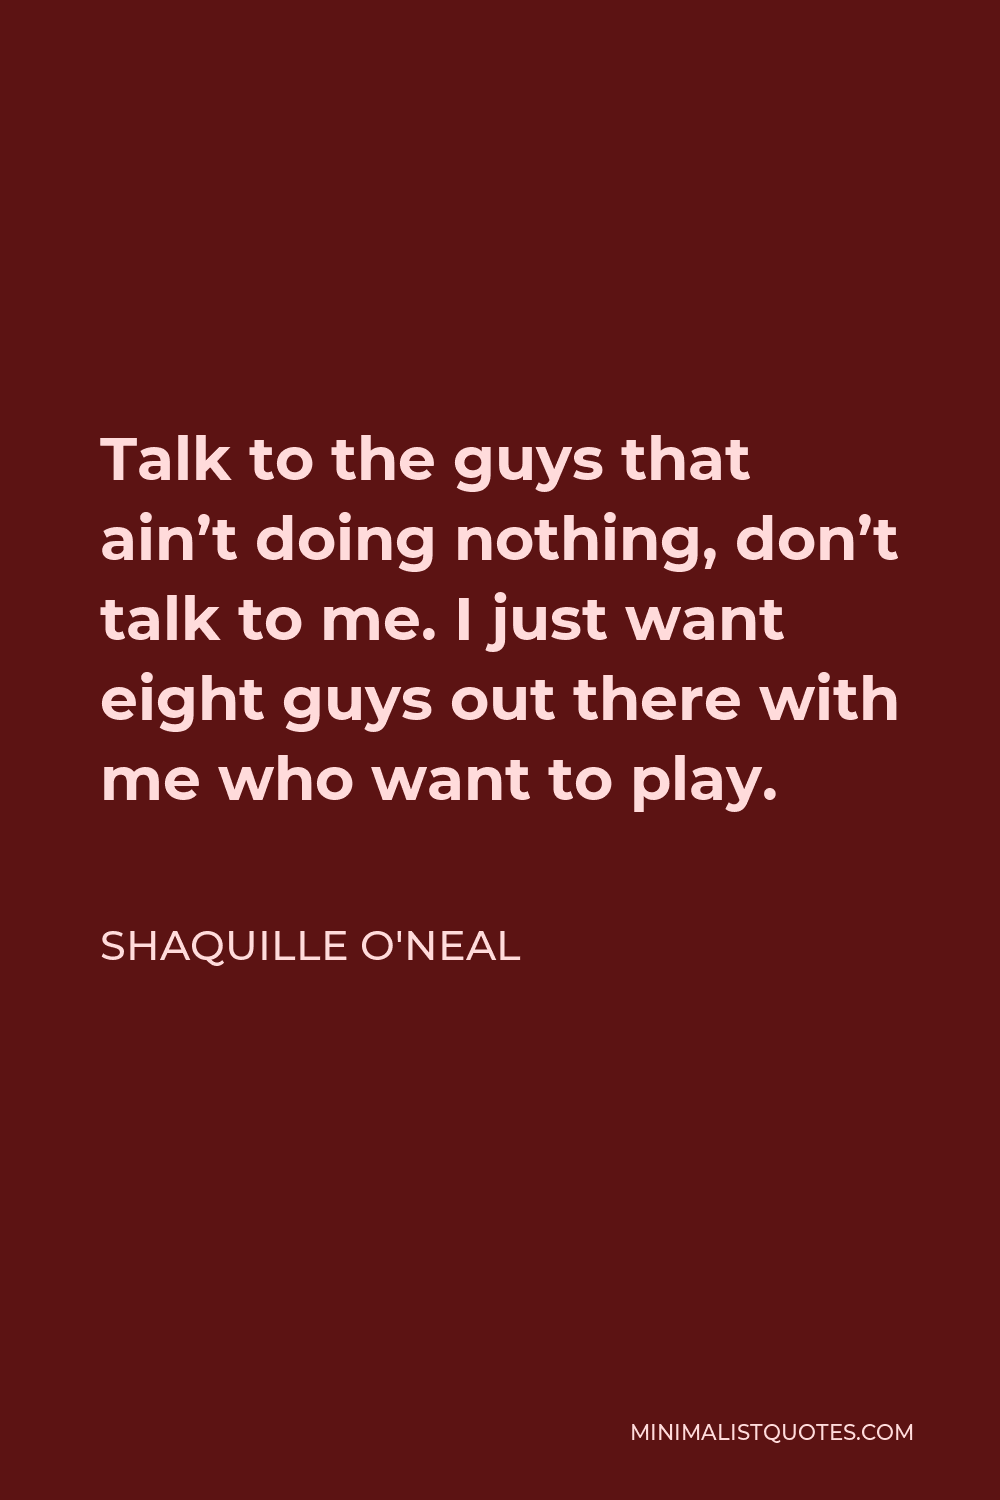 Shaquille O'Neal Quote - Talk to the guys that ain’t doing nothing, don’t talk to me. I just want eight guys out there with me who want to play.